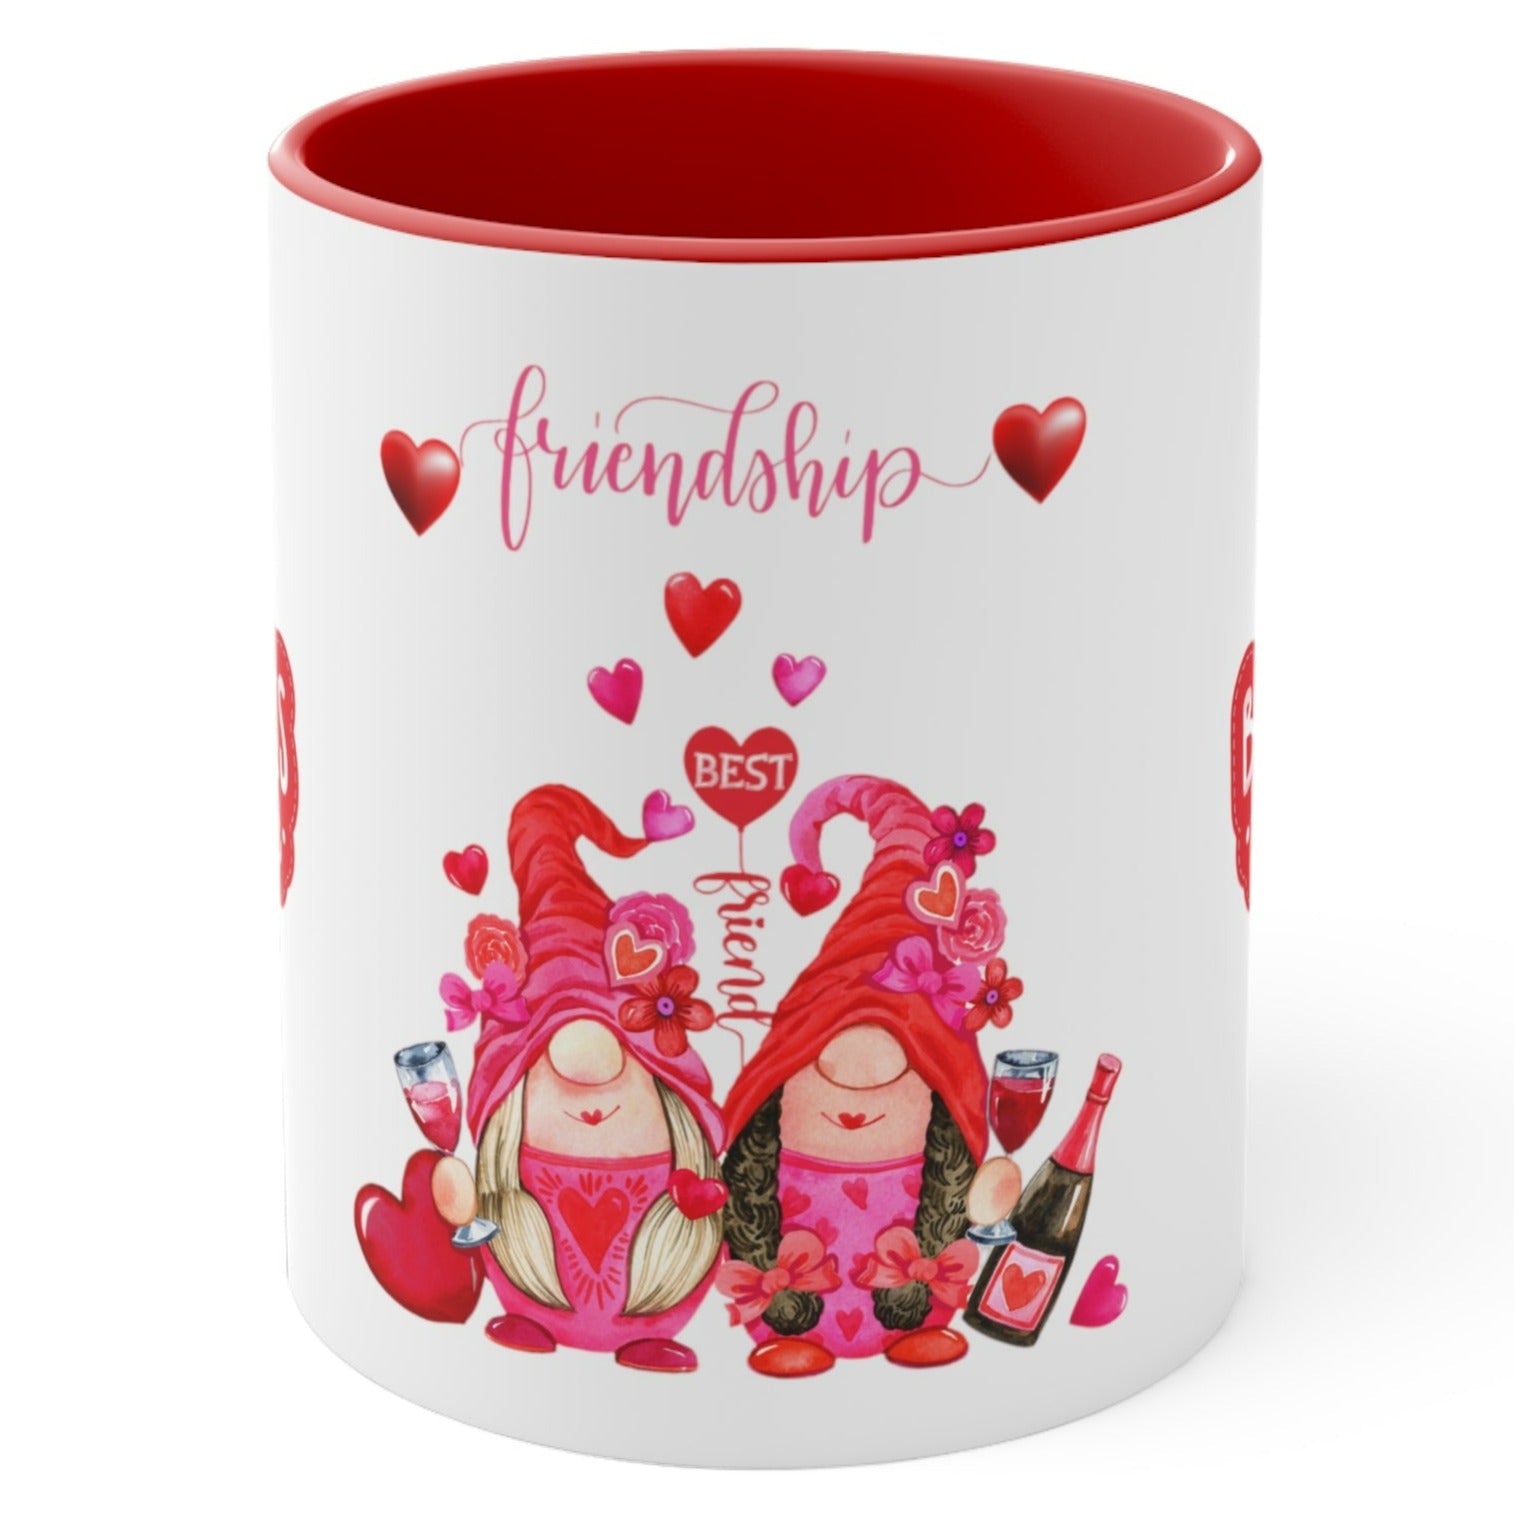 Customise Valentine Gifts For Your Friends in a Unique Way with FNP